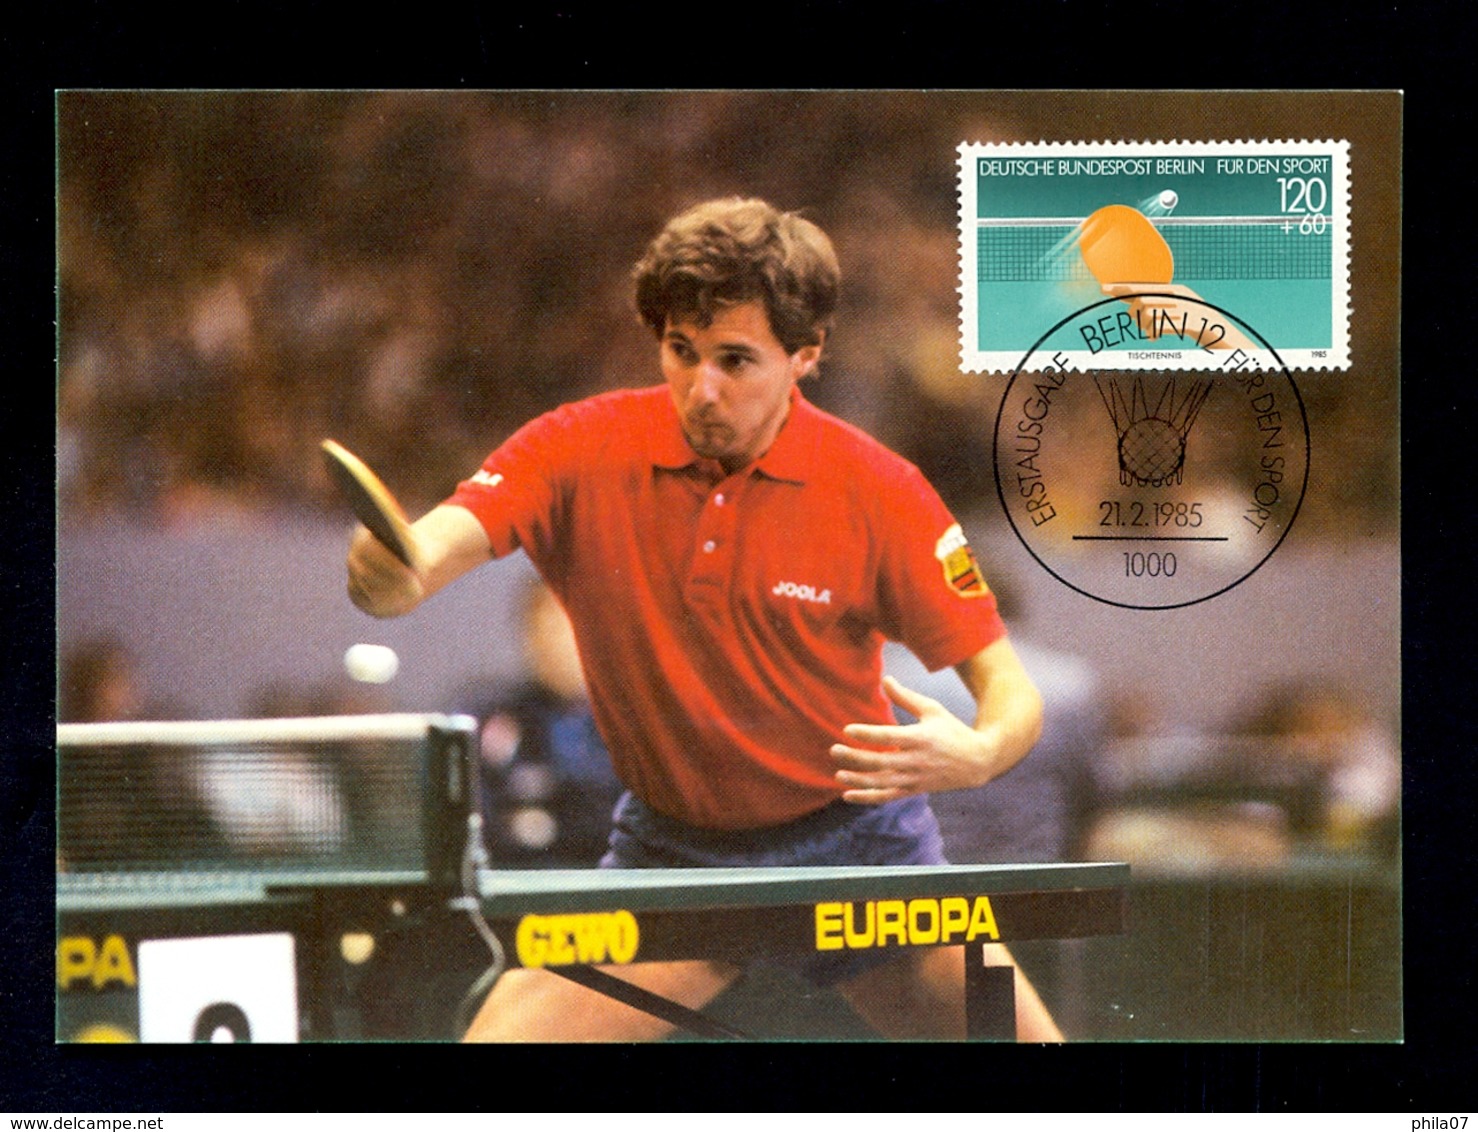 GERMANY 1985 - Commemorative Card, Cancel And Stamp For TABLE TENNIS - Tenis De Mesa